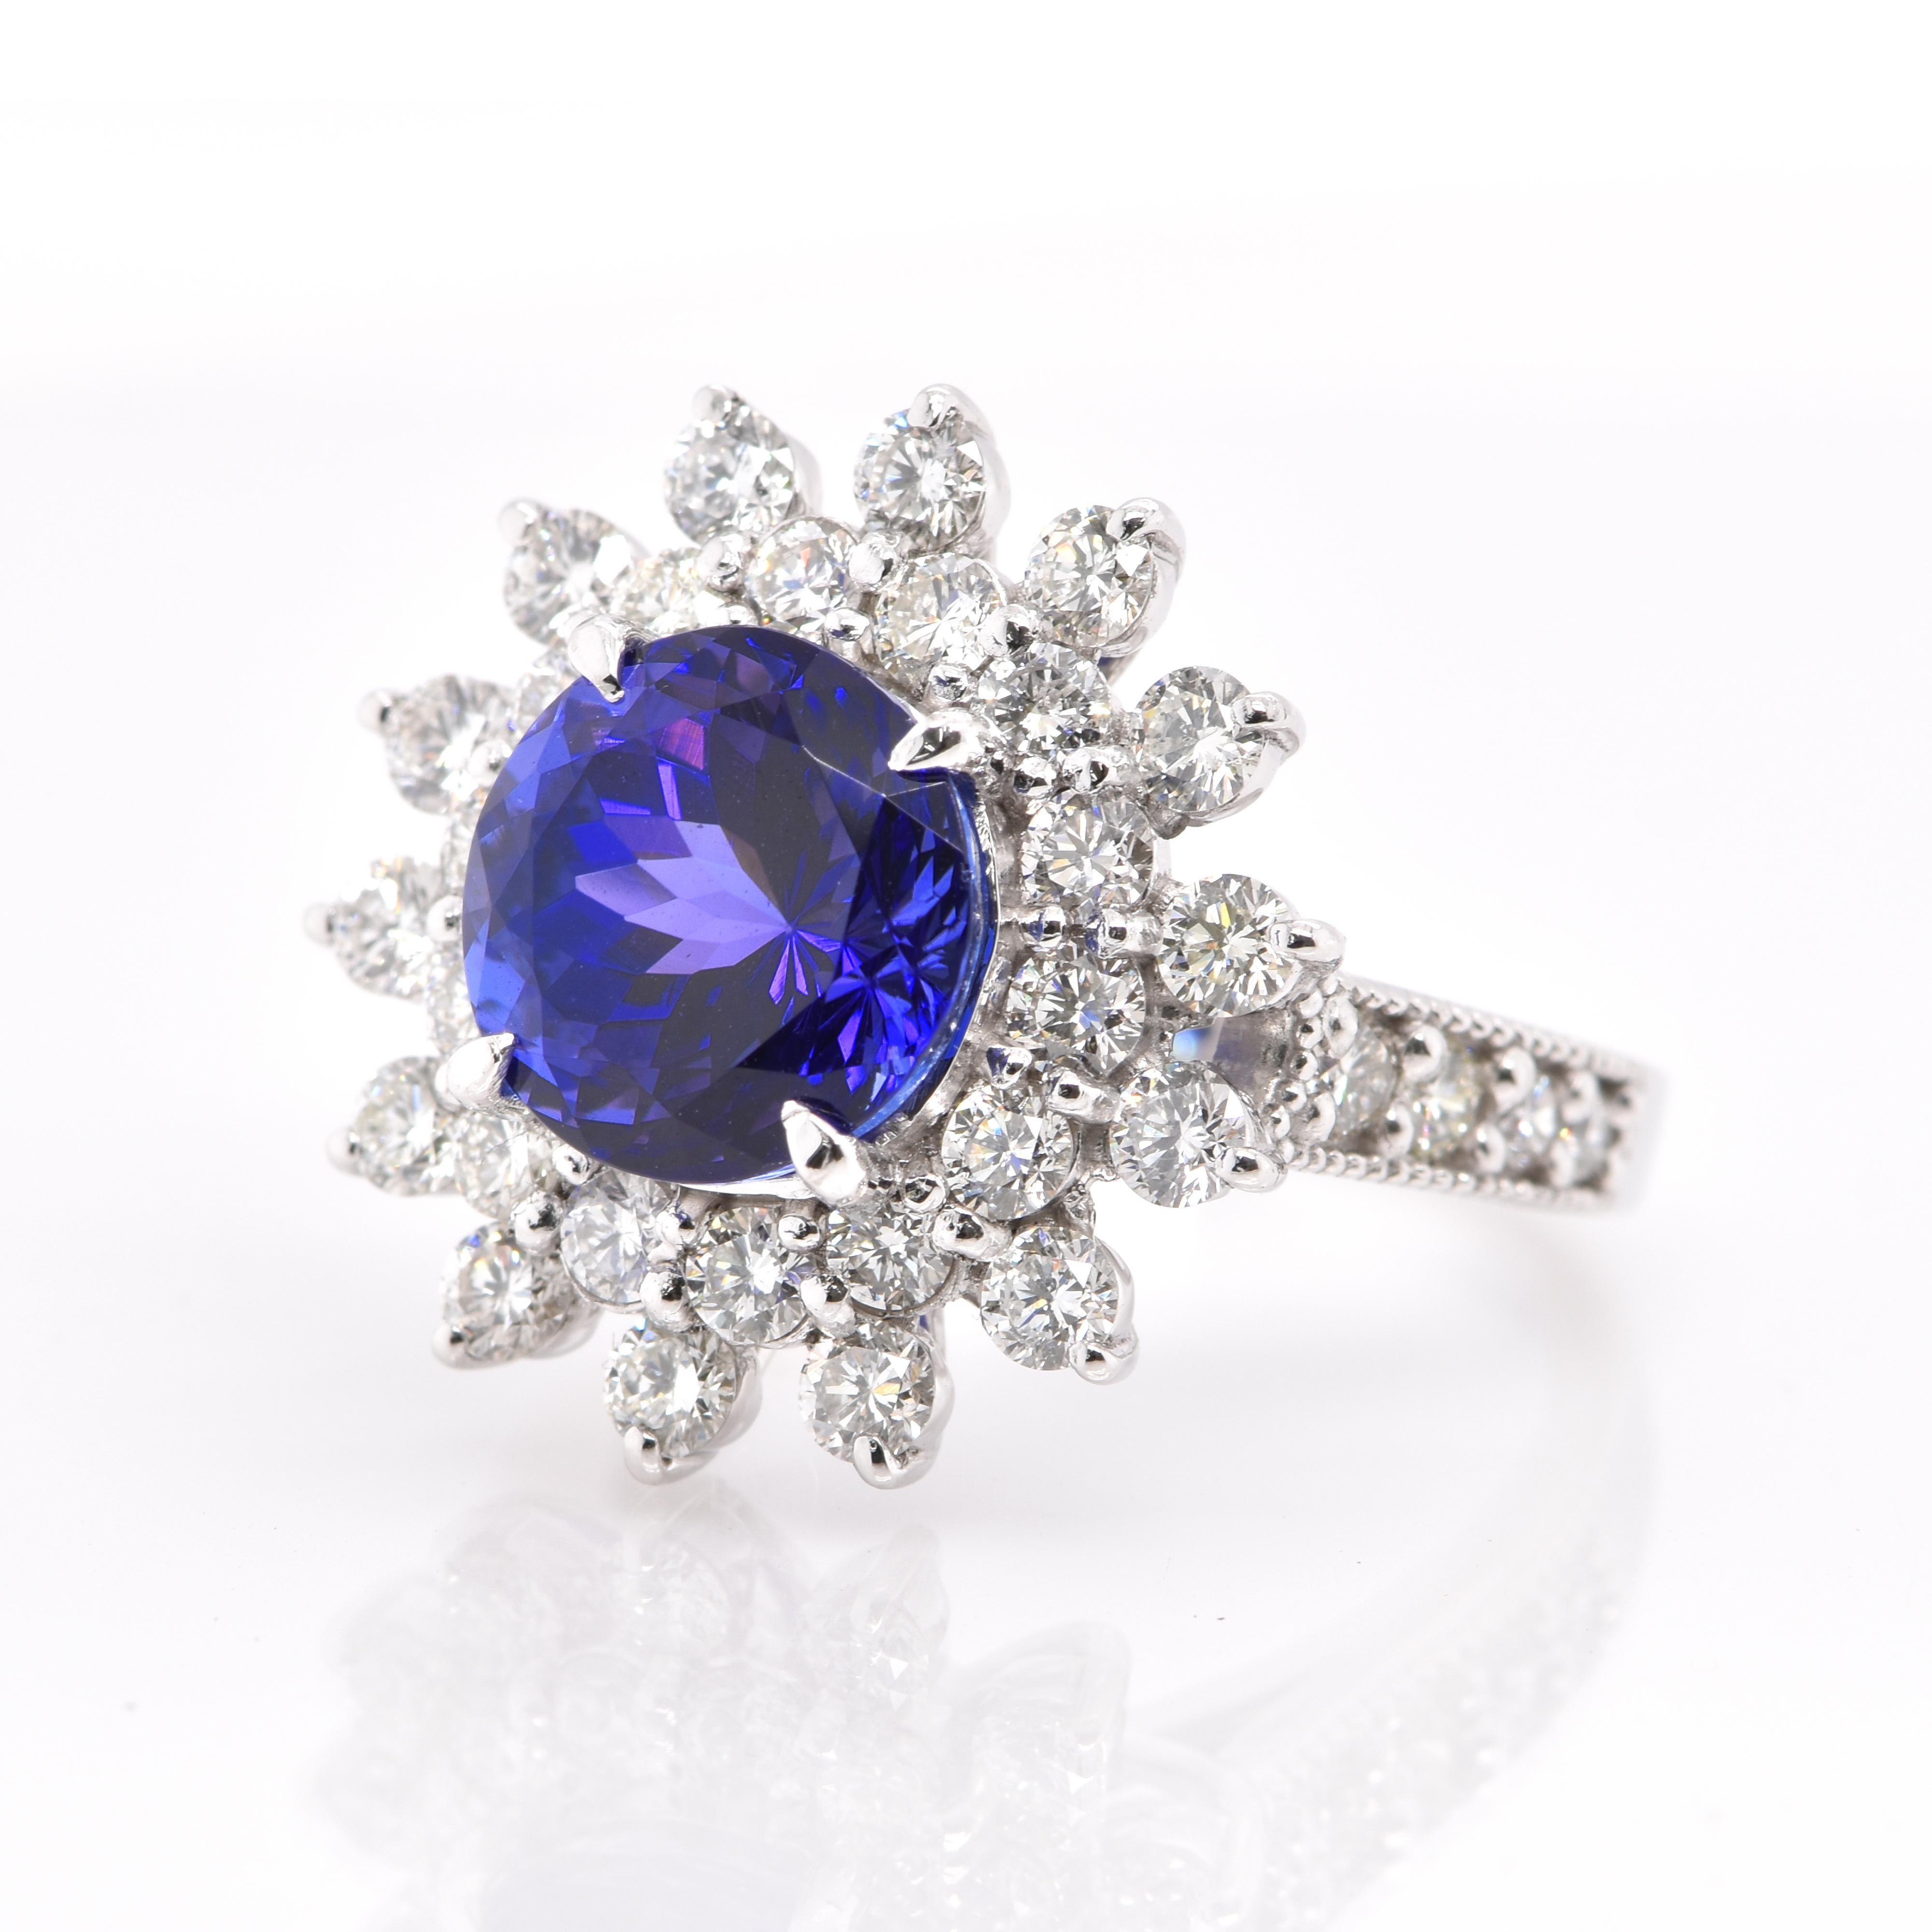 A beautiful Halo Cocktail Ring featuring a 4.29 Carat Natural Tanzanite and 1.78 Carats of Diamond Accents set in Platinum. Tanzanite's name was given by Tiffany and Co after its only known source: Tanzania. Tanzanite displays beautiful pleochroic